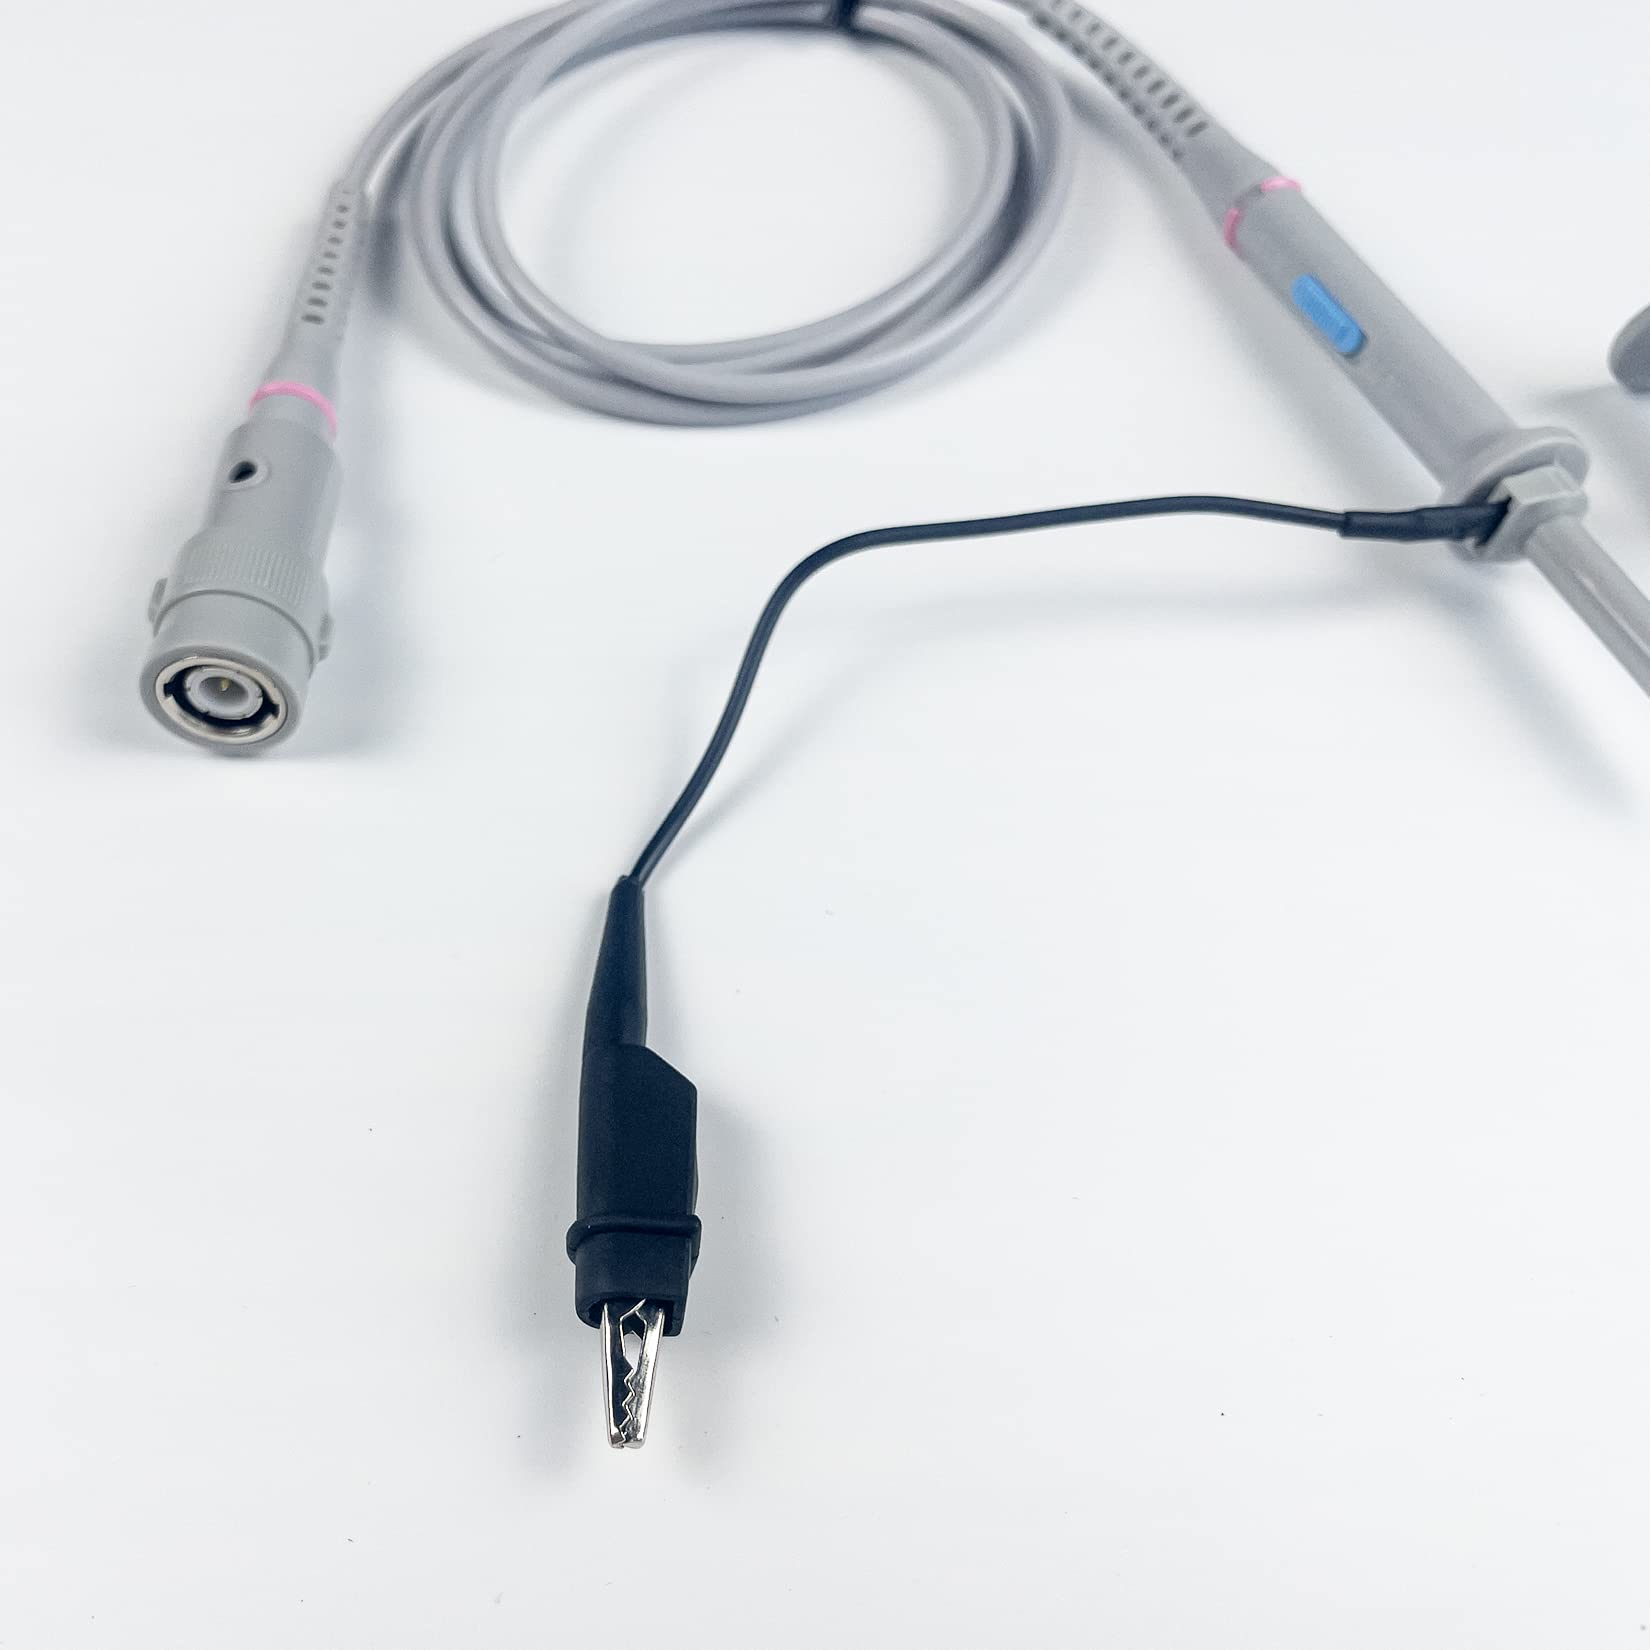 OWON 100MHz Oscilloscope Probe Kit, BNC Oscilloscope Clip Probe Attenuation Can be Adjusted by 1x or 10x Slide Switch for Series Oscilloscope